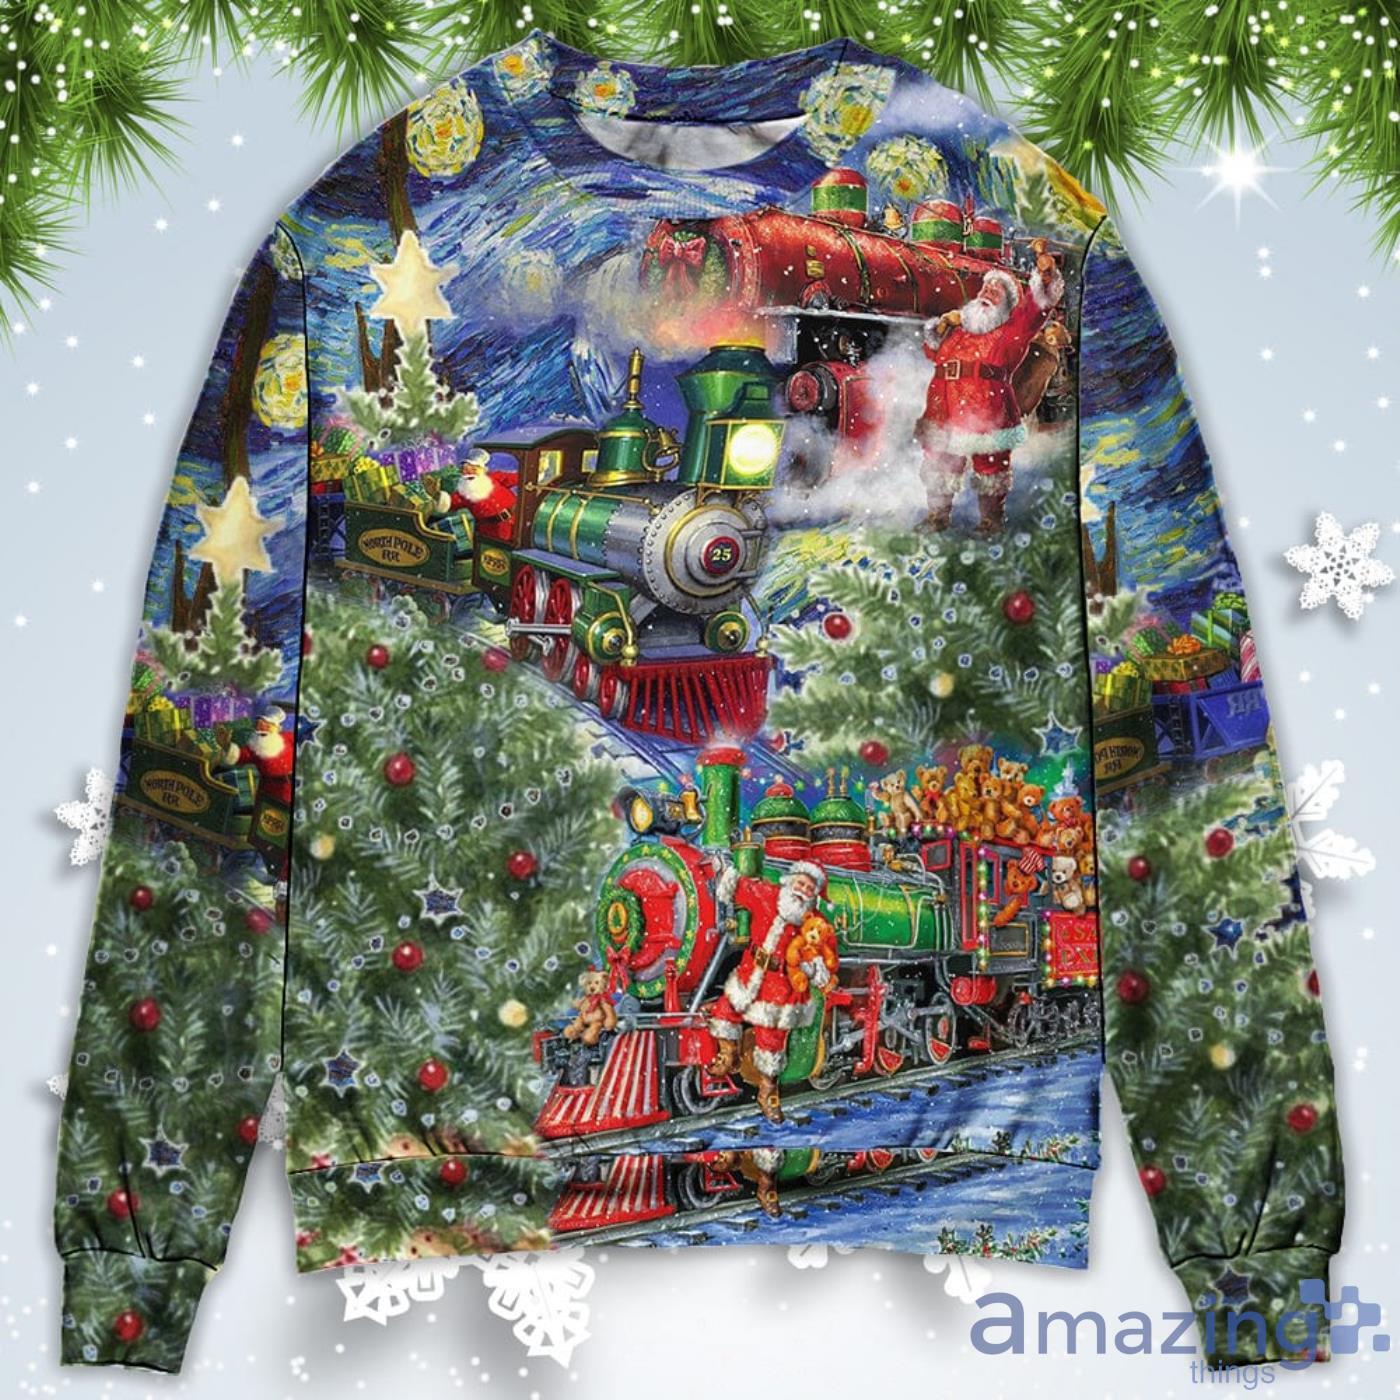 The Gift Train Arrives At The Wharf Christmas Sweatshirt Sweater Product Photo 1